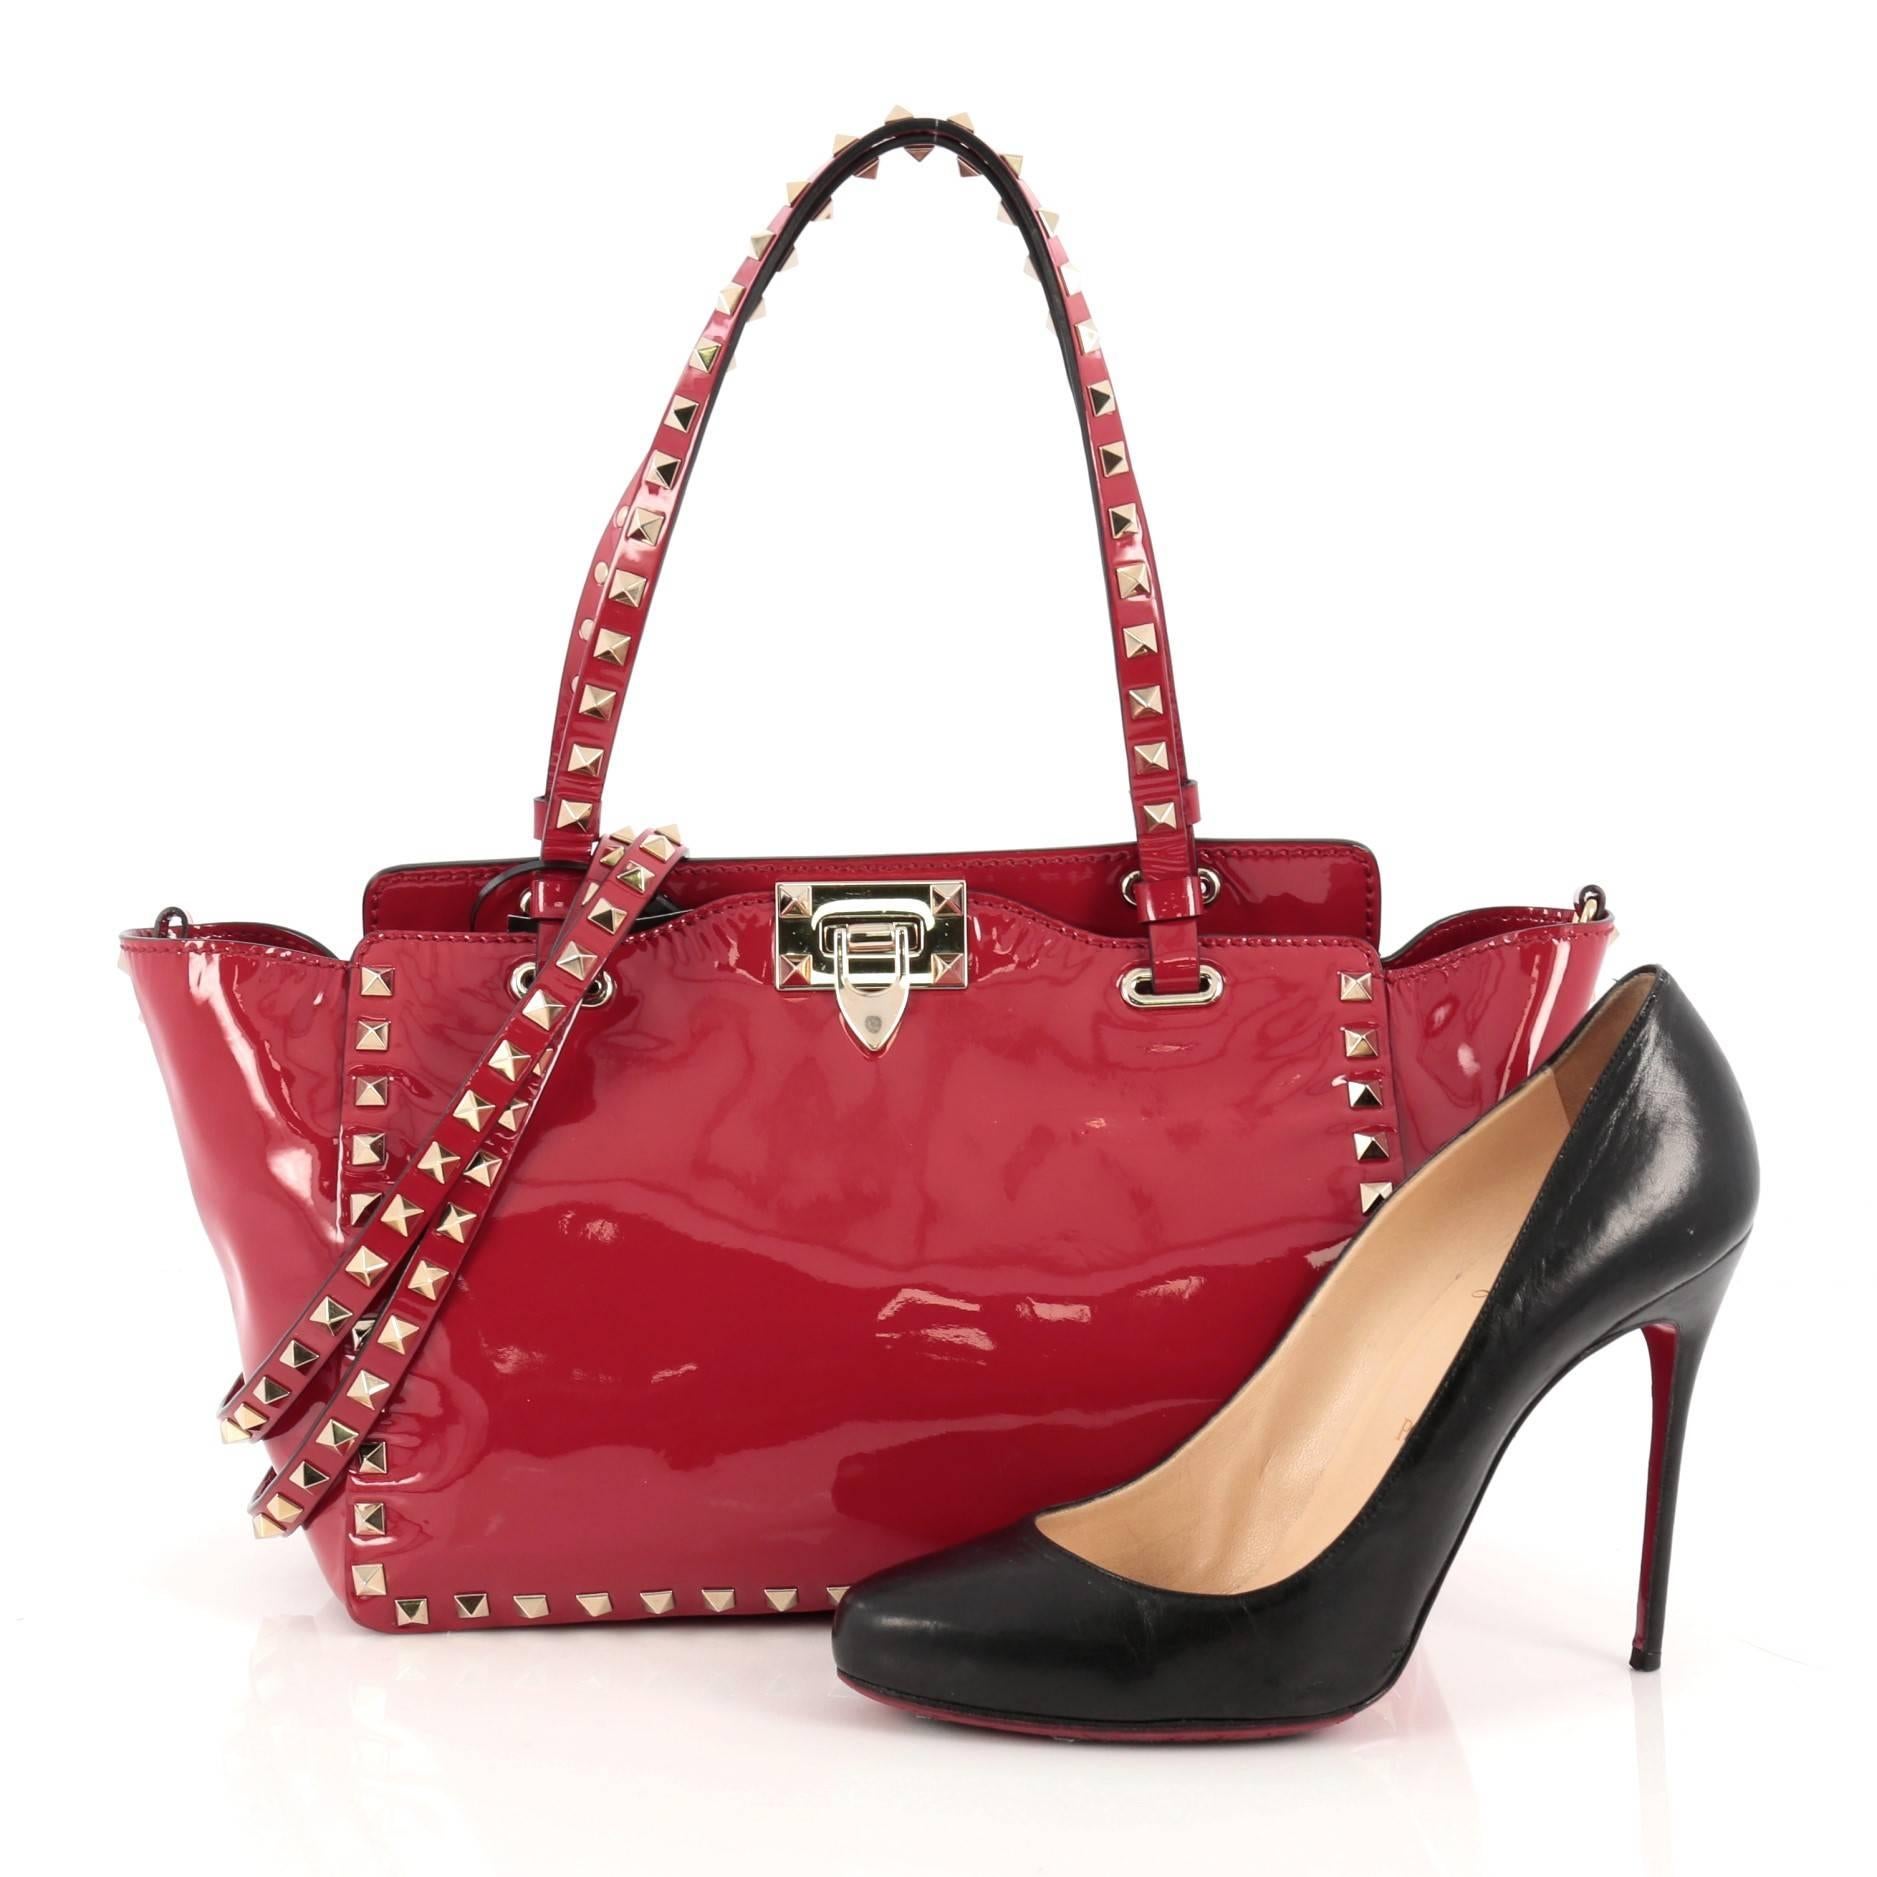 This authentic Valentino Rockstud Tote Soft Patent Small mixes edgy style with luxurious detailing. Crafted from red soft patent leather, this stylish tote features dual tall flat handles, gold-tone pyramid stud trim details, signature clasp